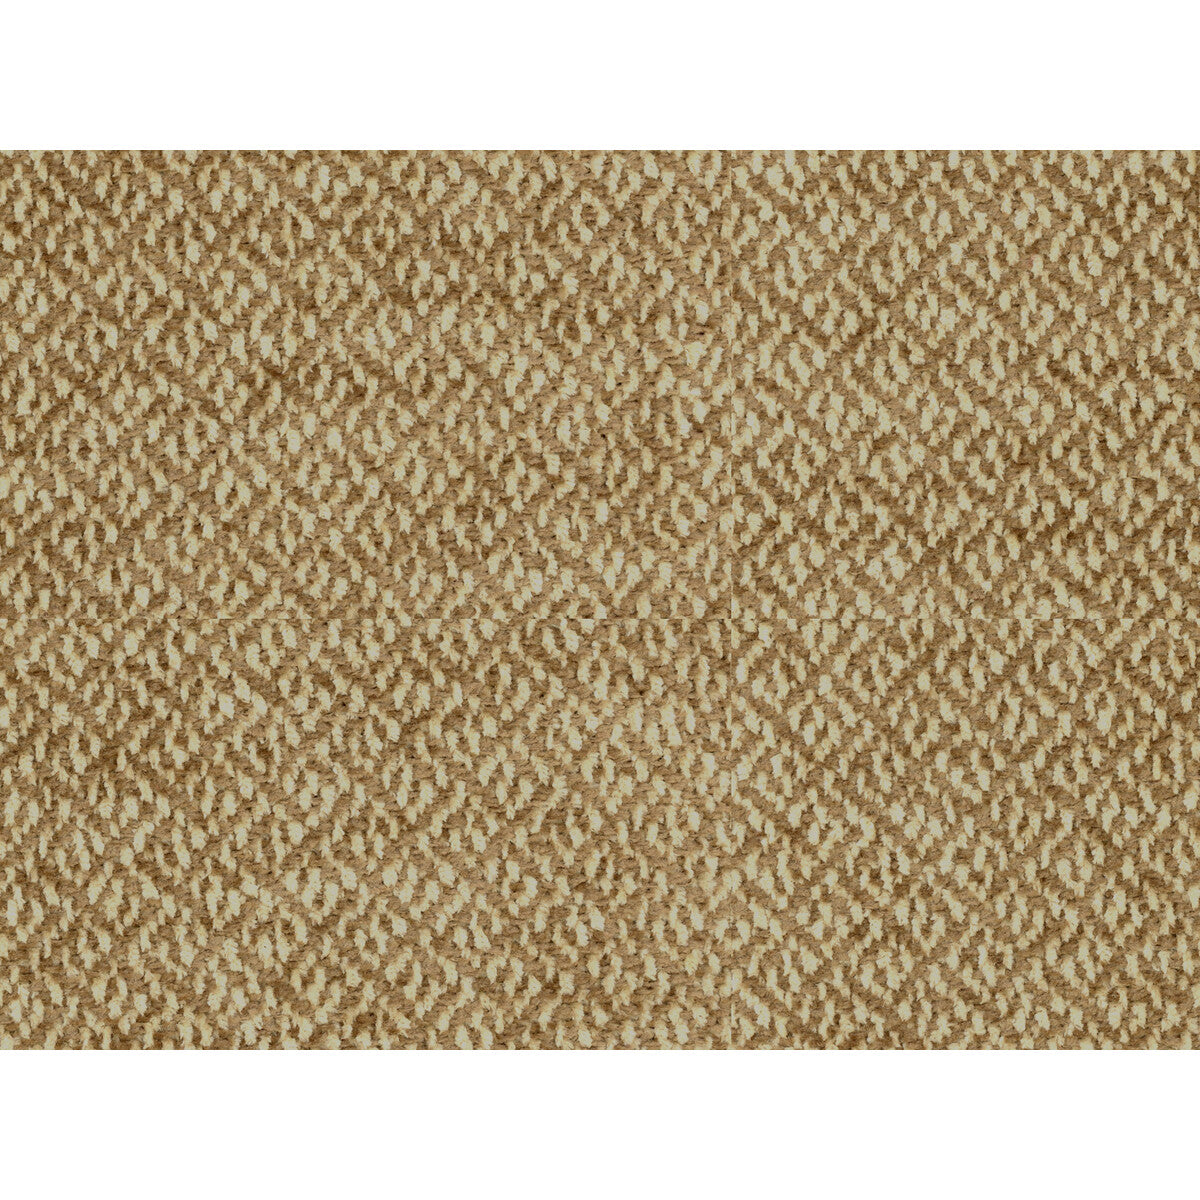 Cottian Chenille fabric in rattan color - pattern 8016110.116.0 - by Brunschwig &amp; Fils in the Chambery Textures collection